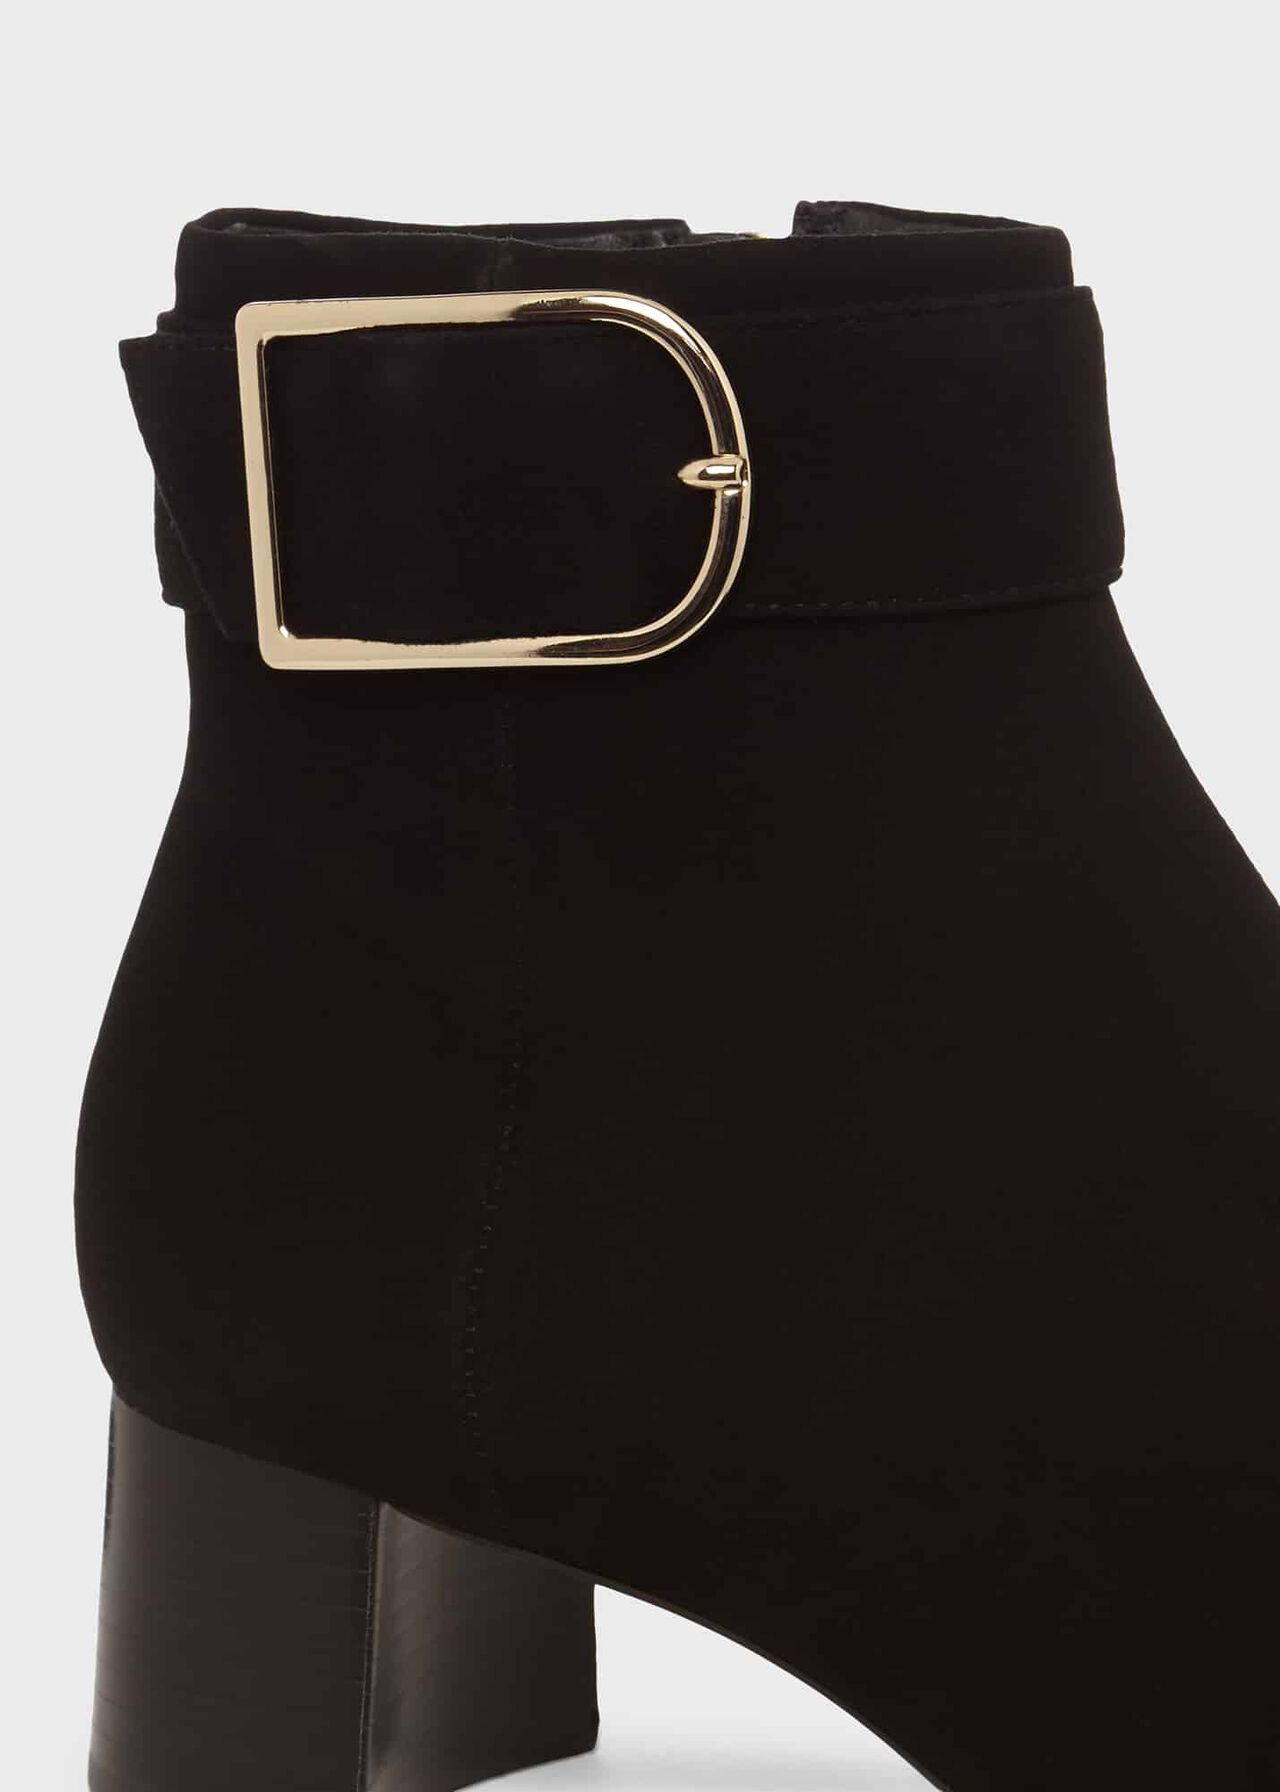 Suzannah Suede Ankle Boot, Black, hi-res